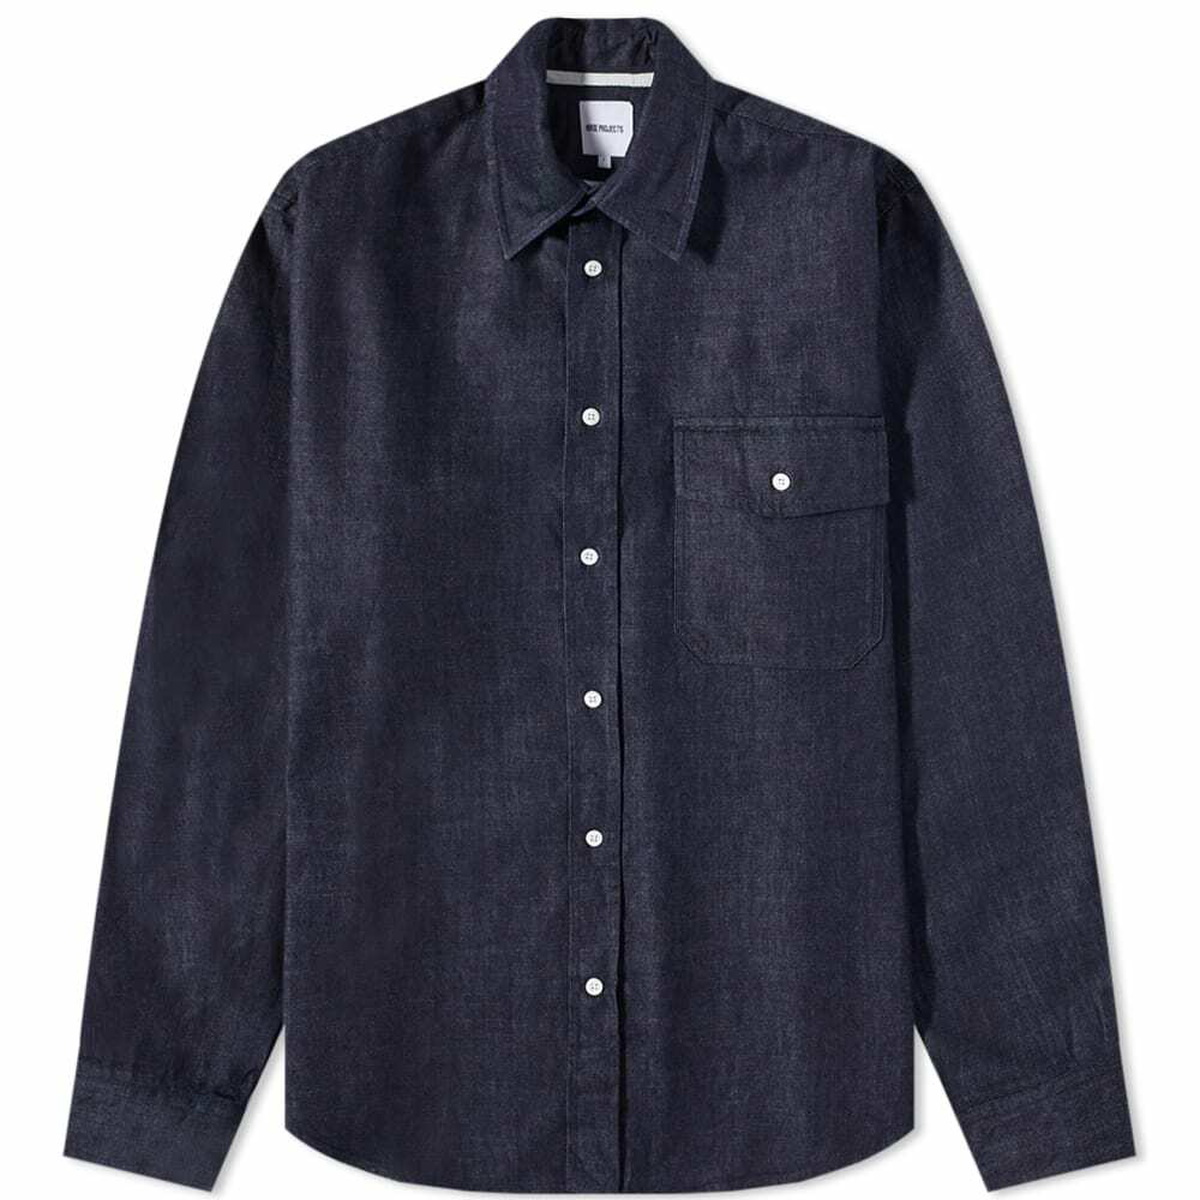 Norse Projects Men's Algot Denim Shirt in Indigo Norse Projects